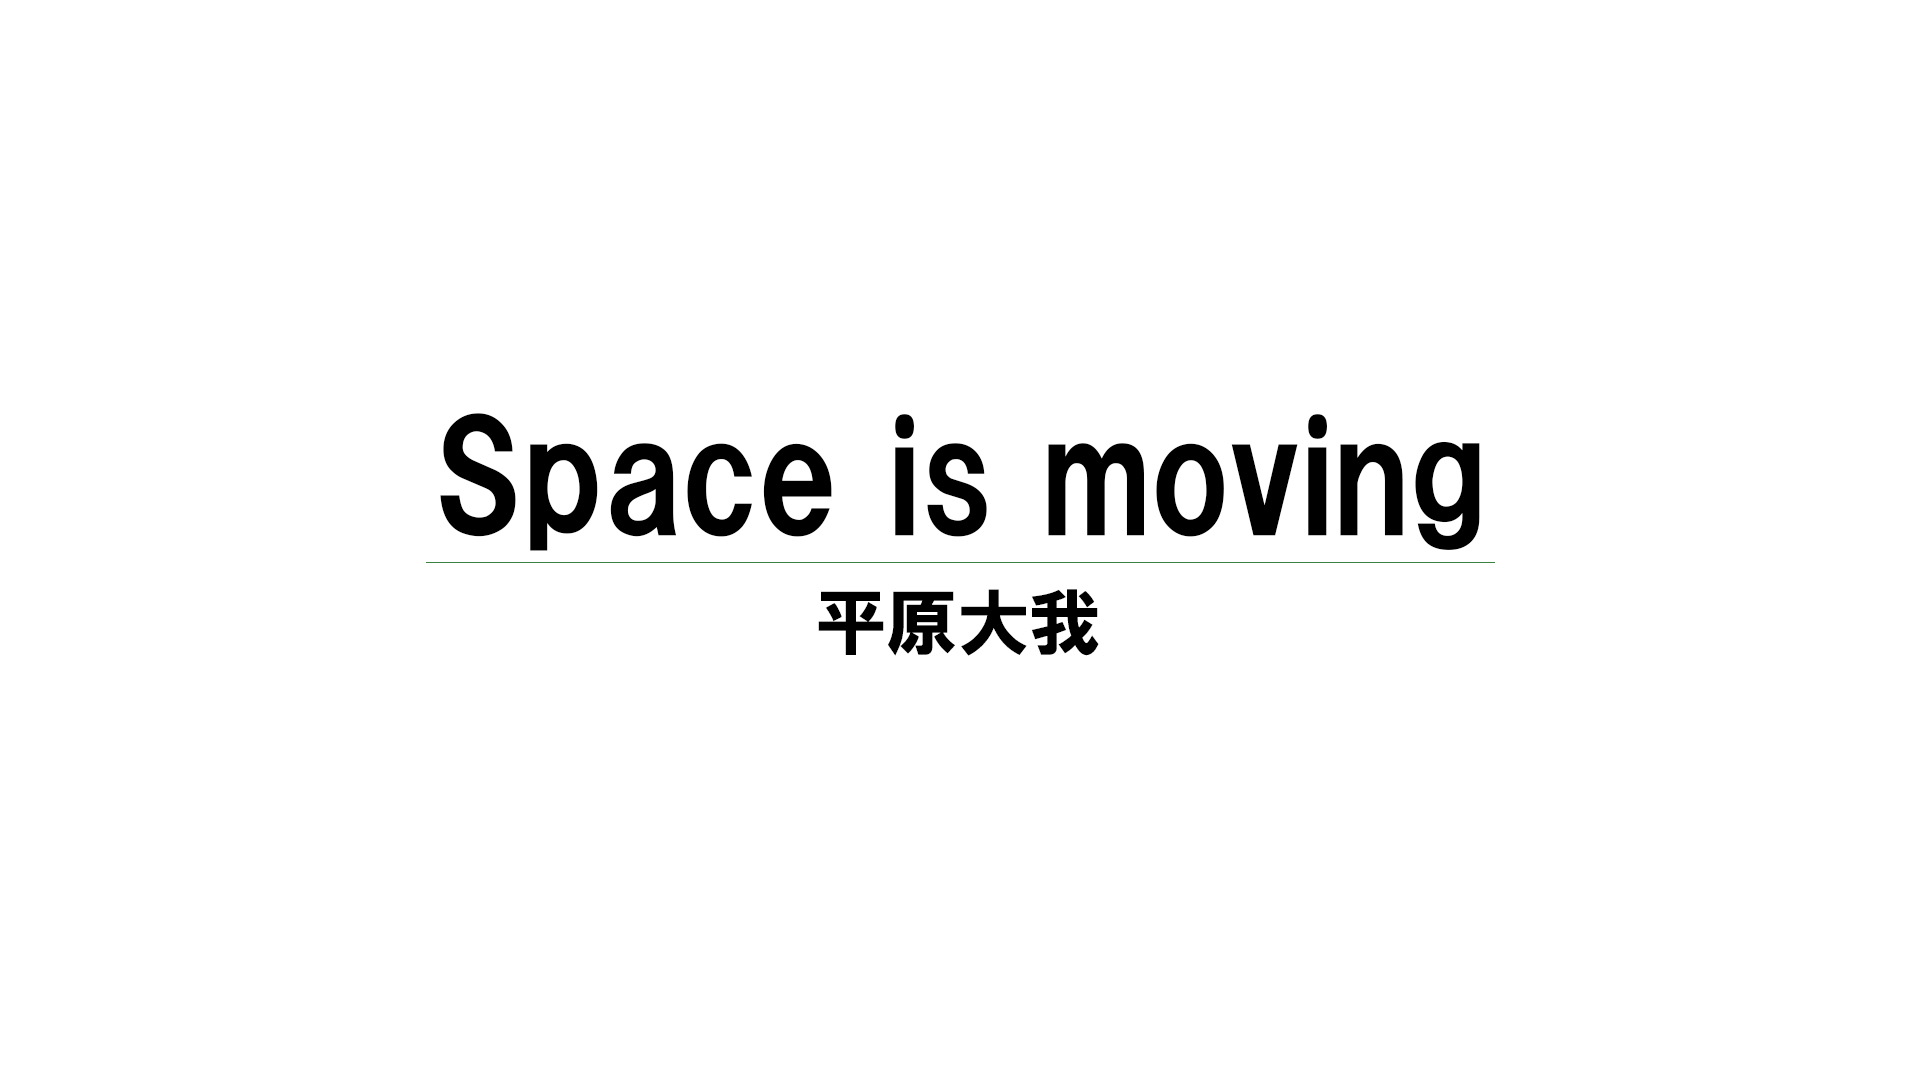 Space is moving